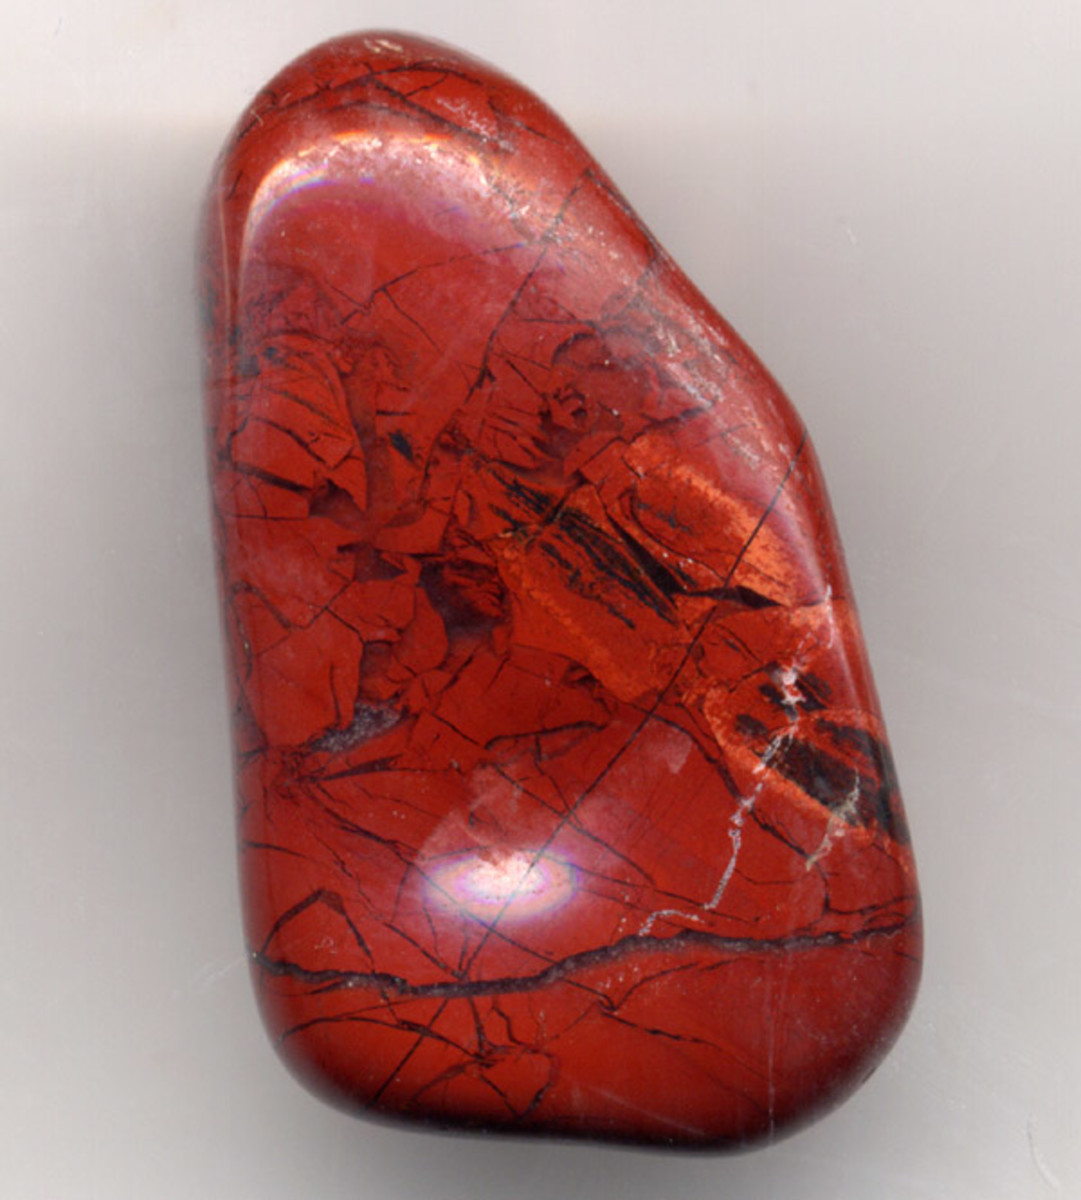 Smooth polished tumble stones can be used in healing as well as raw stones. 